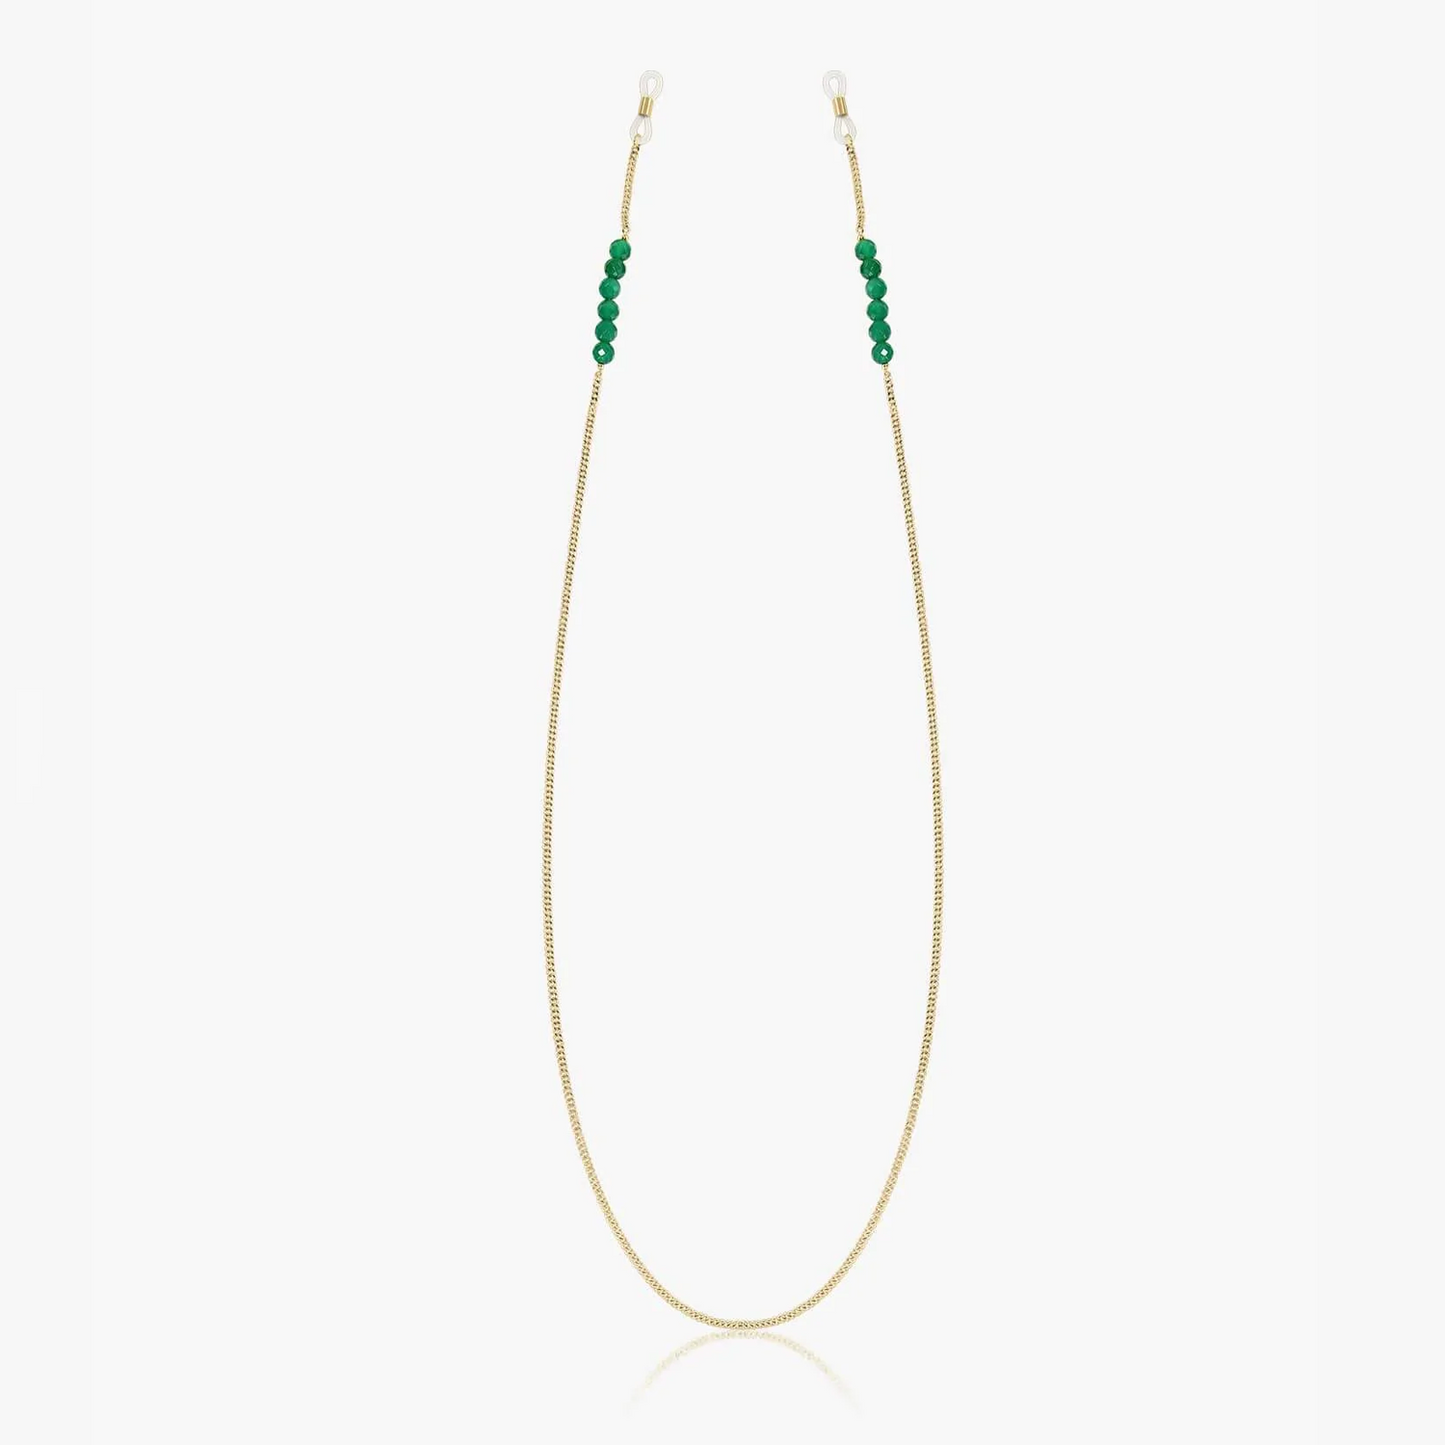 Silver chain for Coco Glasses - Green Onyx